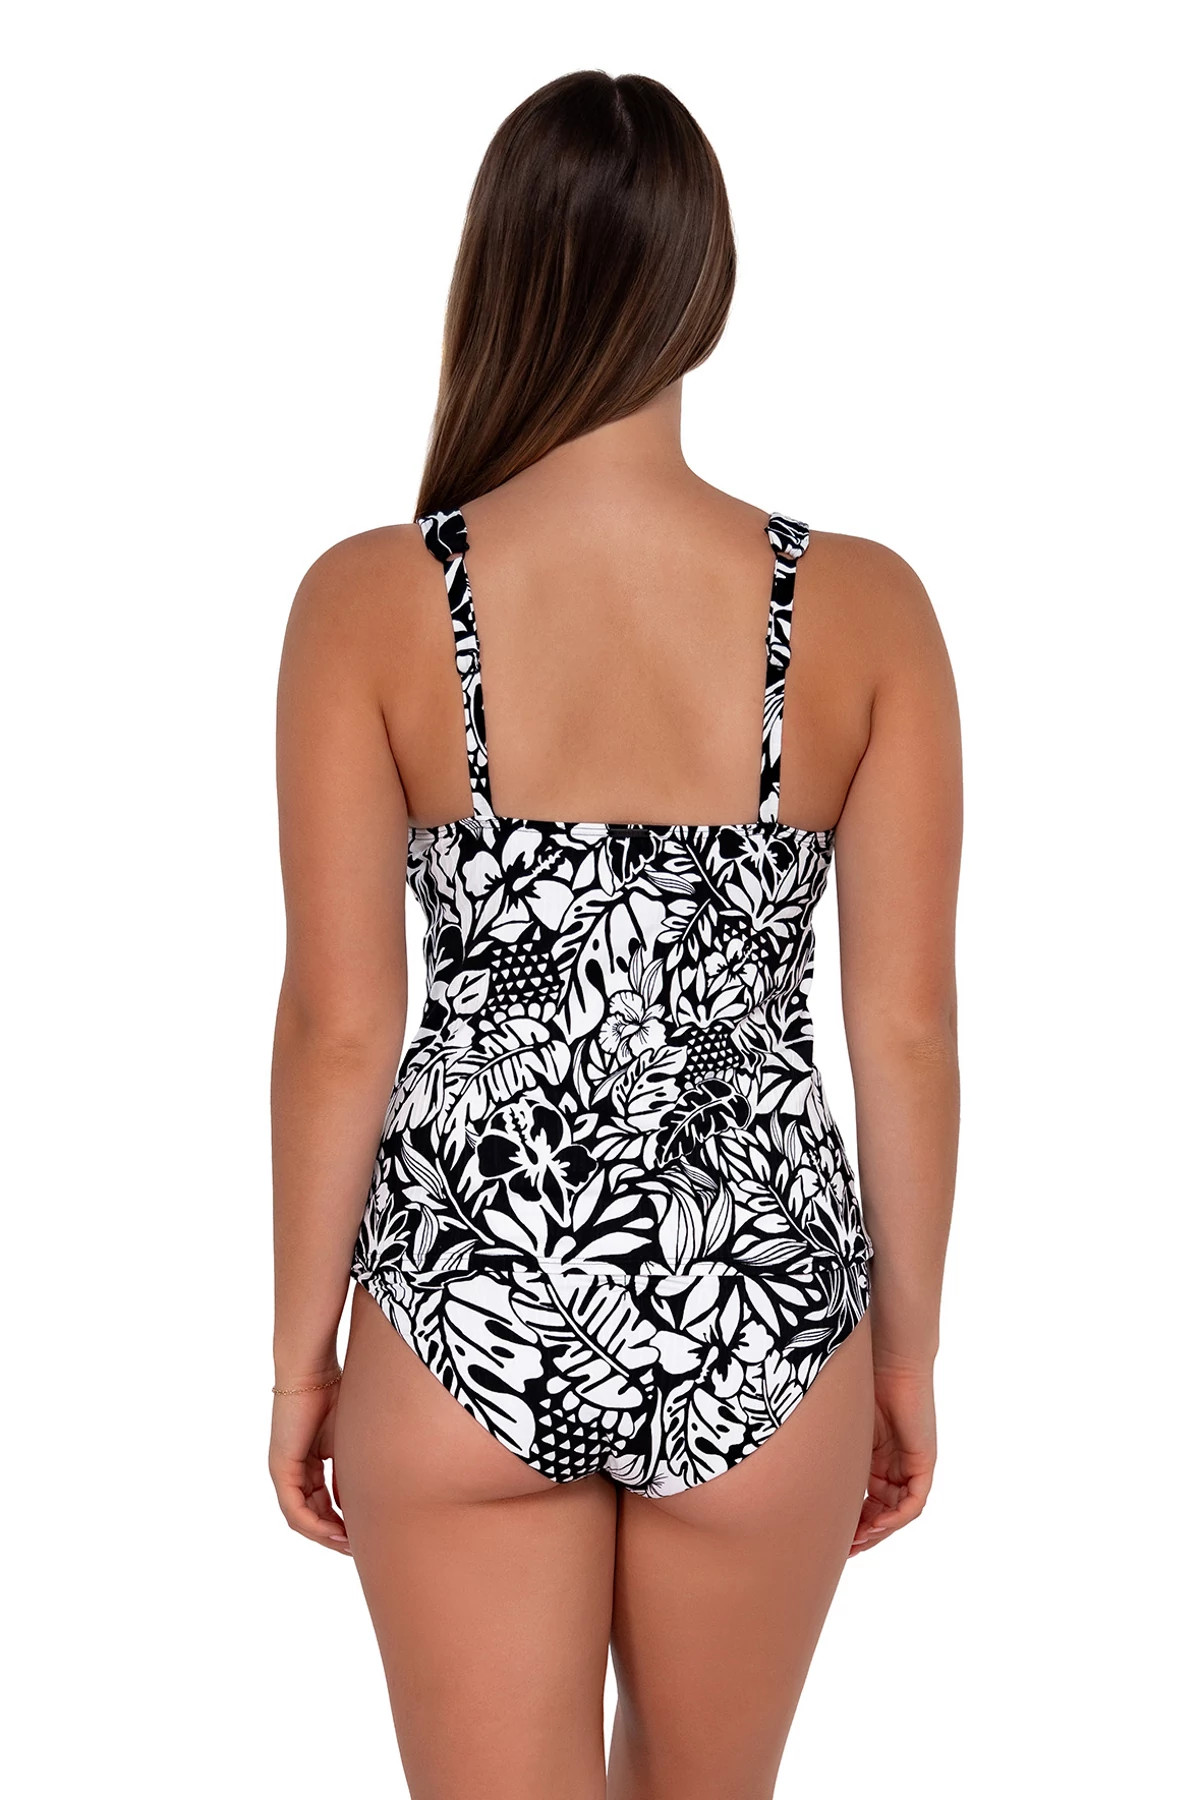 CARIBBEAN SEAGRASS TEXTURE Elsie Underwire Tankini Top (D+ Cup) image number 3